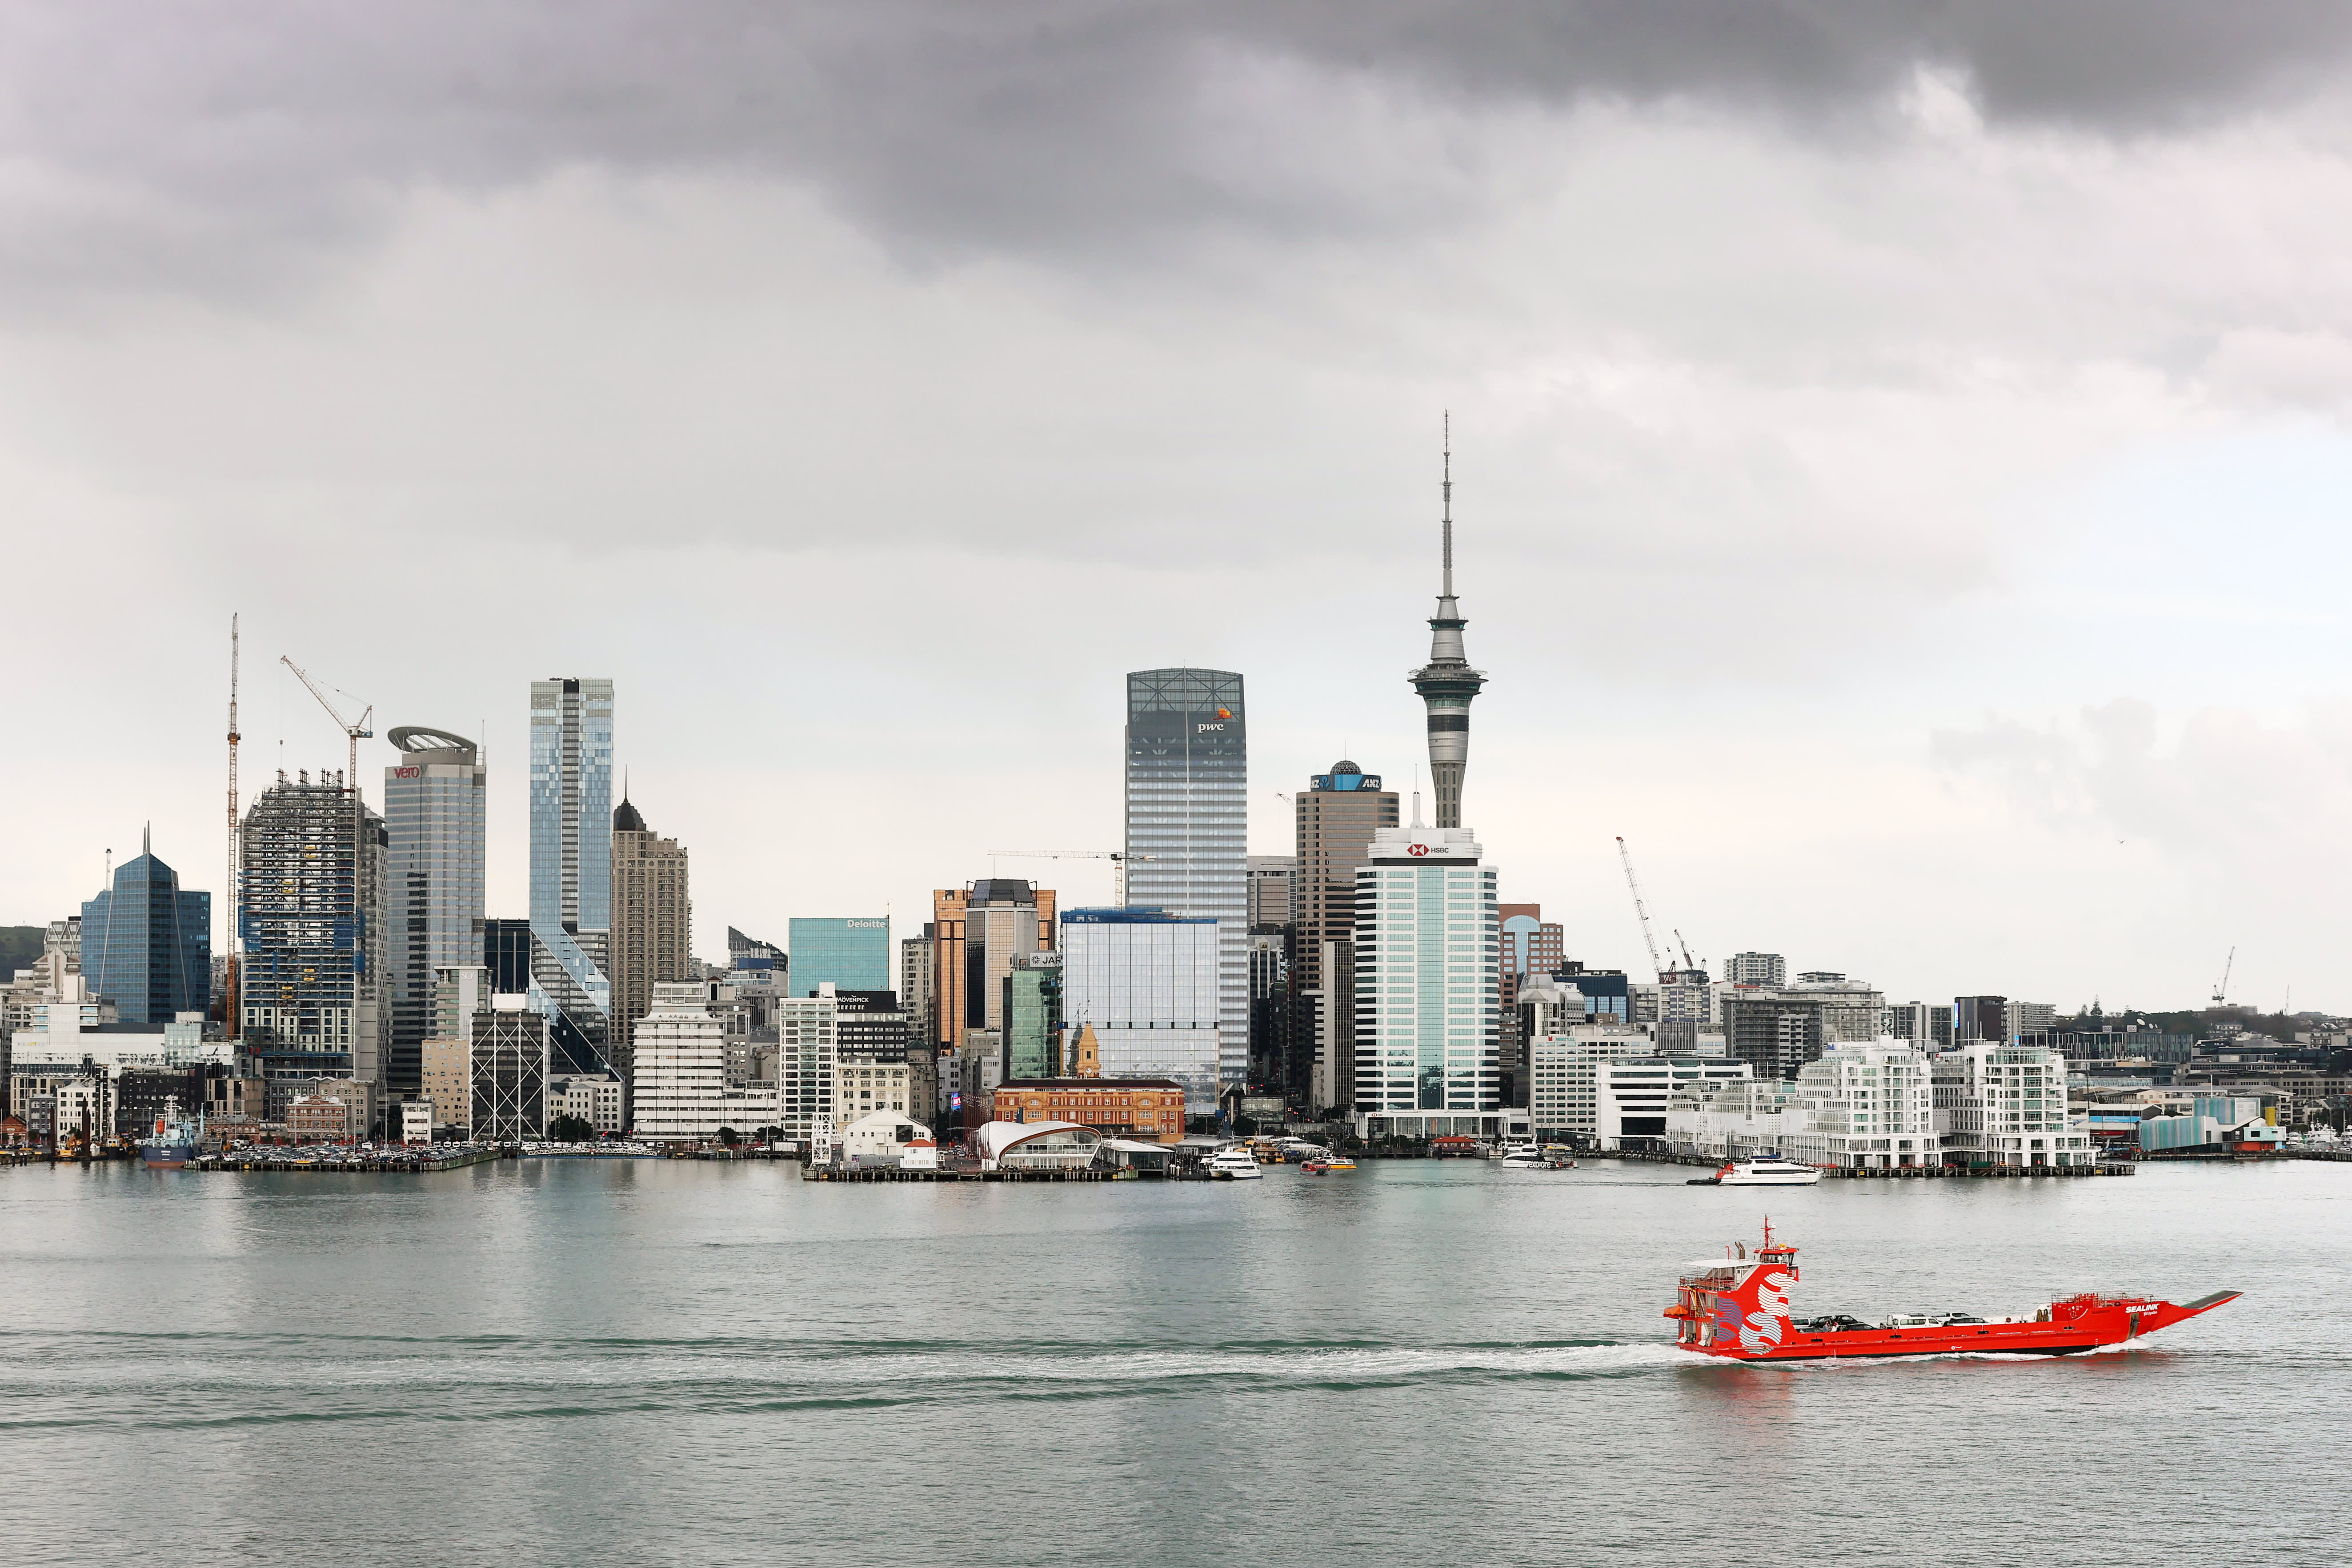 New Zealand enters technical recession after economy shrank 0.1% in first quarter